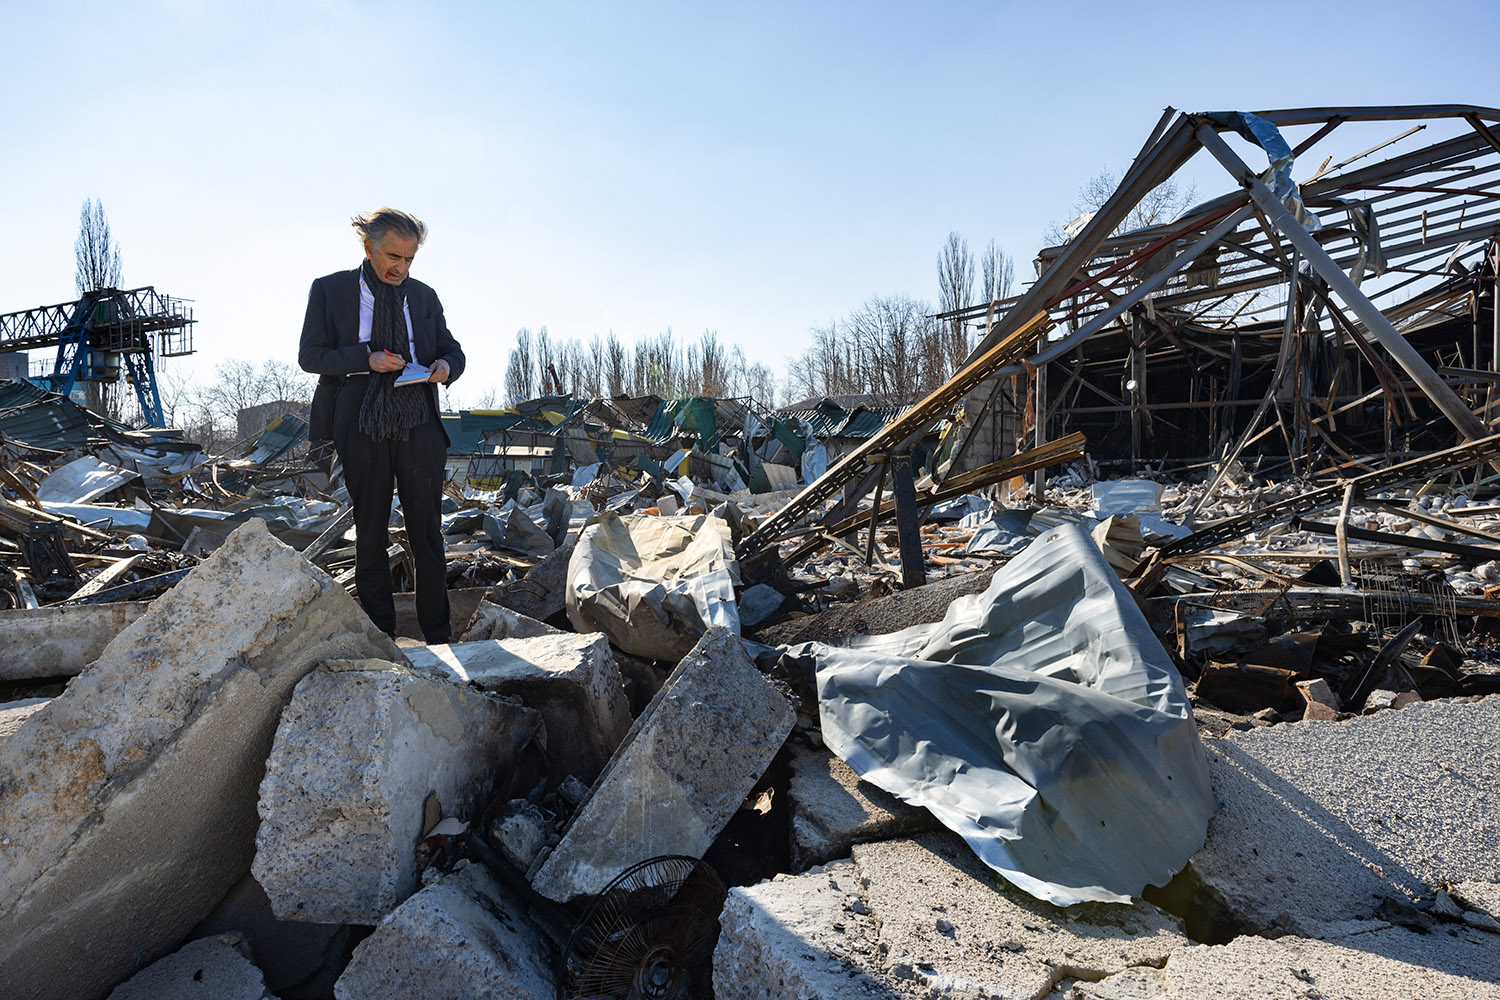 Bernard-Henri Levy in the ruins of the bombed city of Odessa.